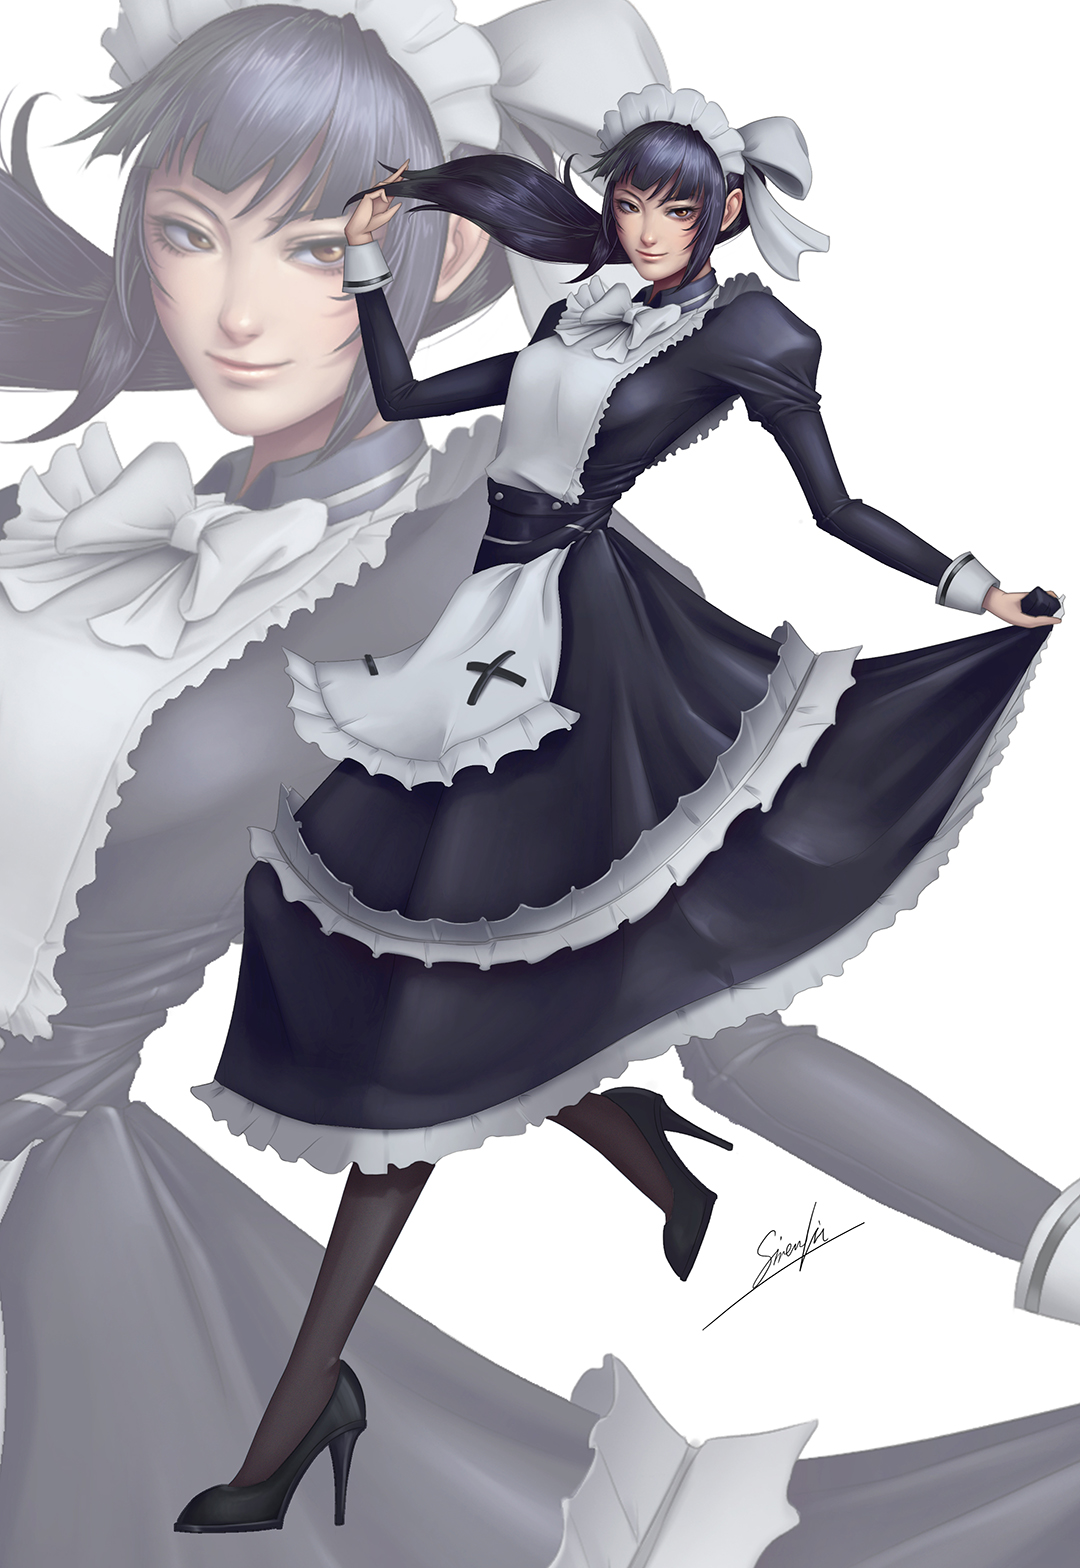 Overlord Anime Maid Outfit Black Heels Ponytail Long Hair Black Hair Anime Girls Smiling 2D Gamma Na 1080x1568